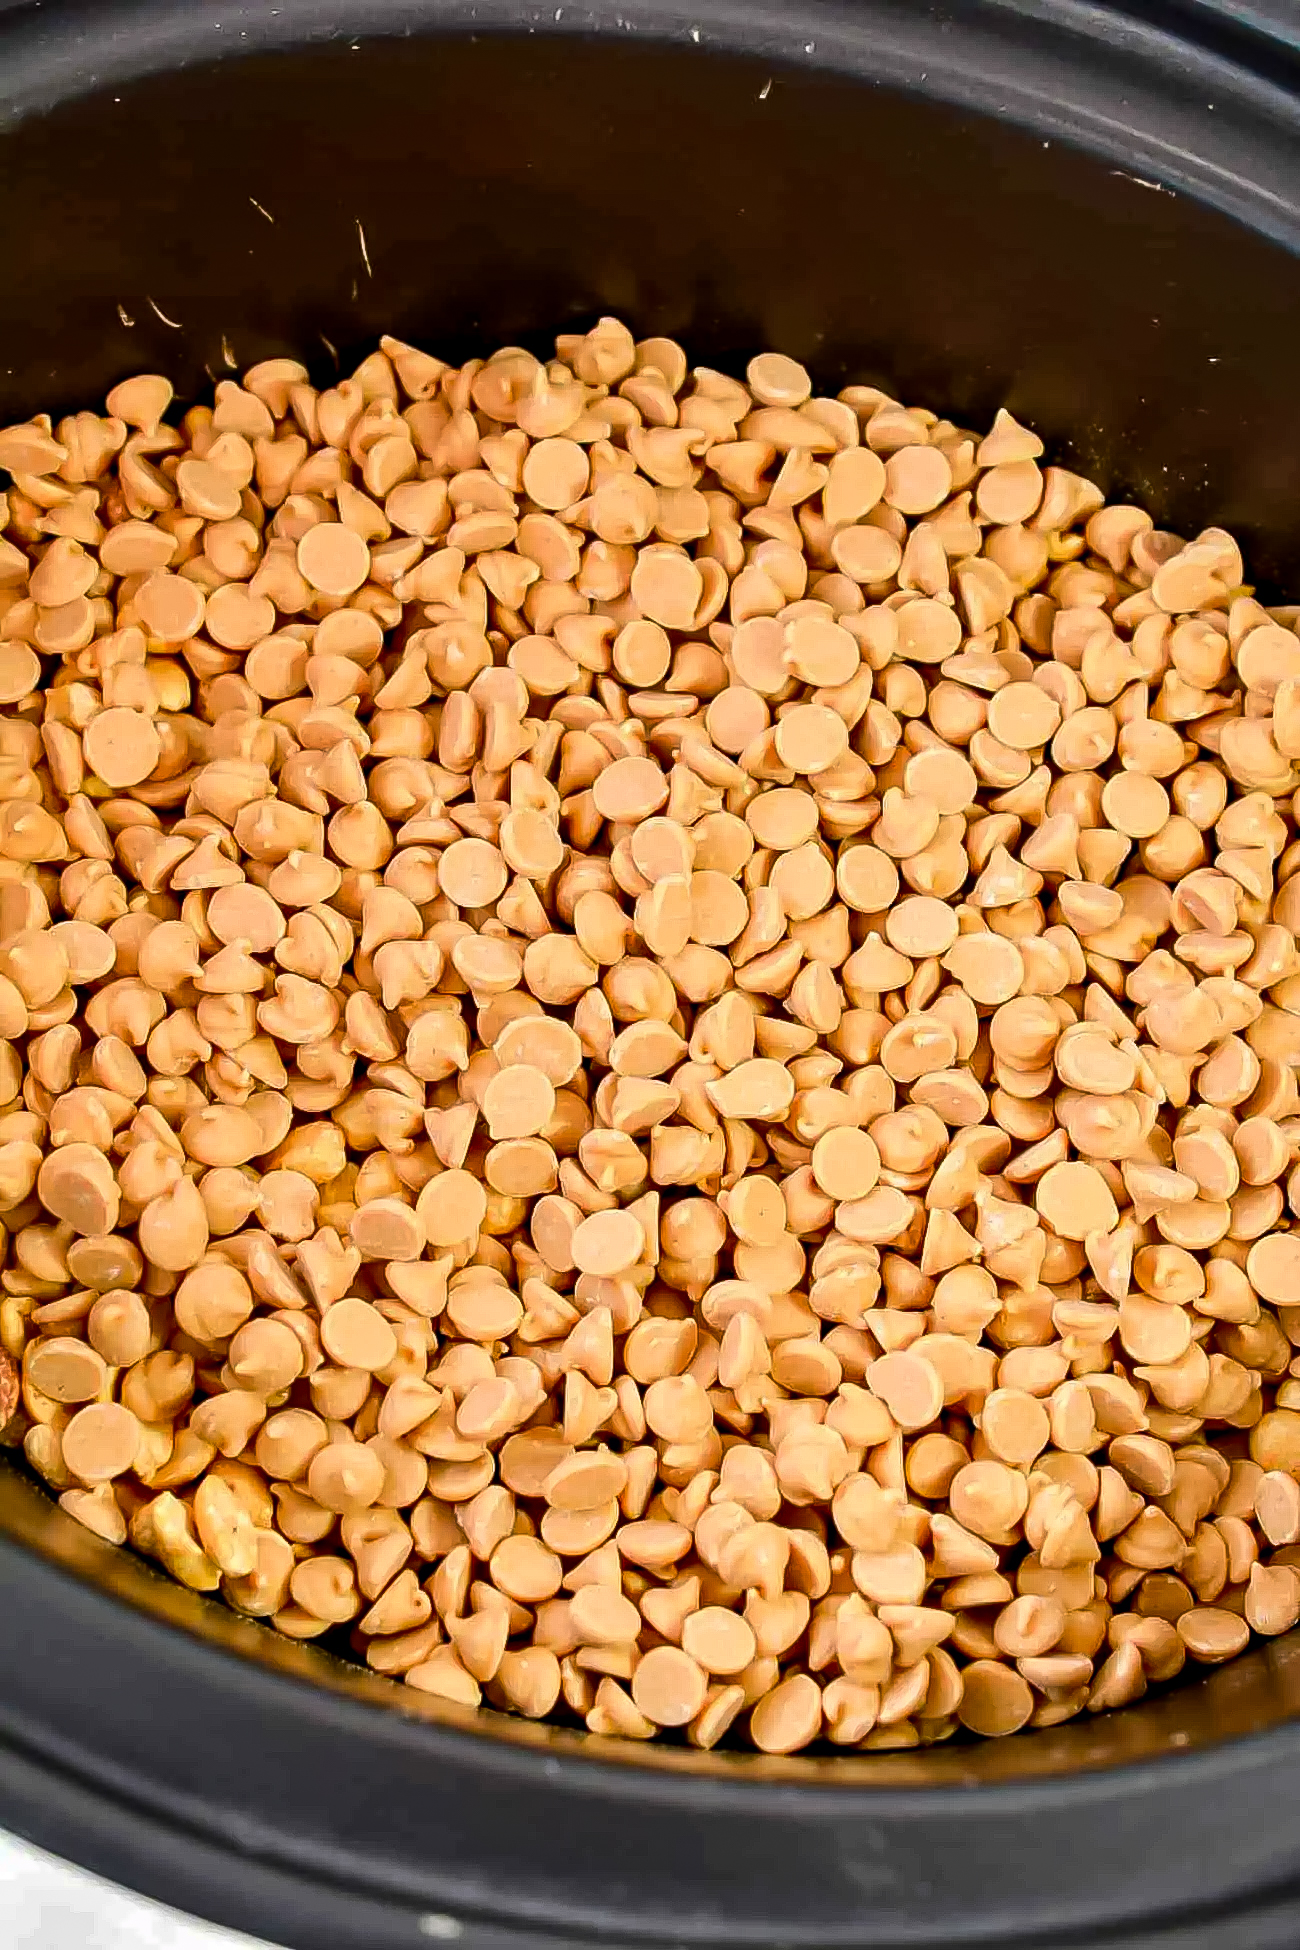 Cover the peanuts with peanut butter chips.